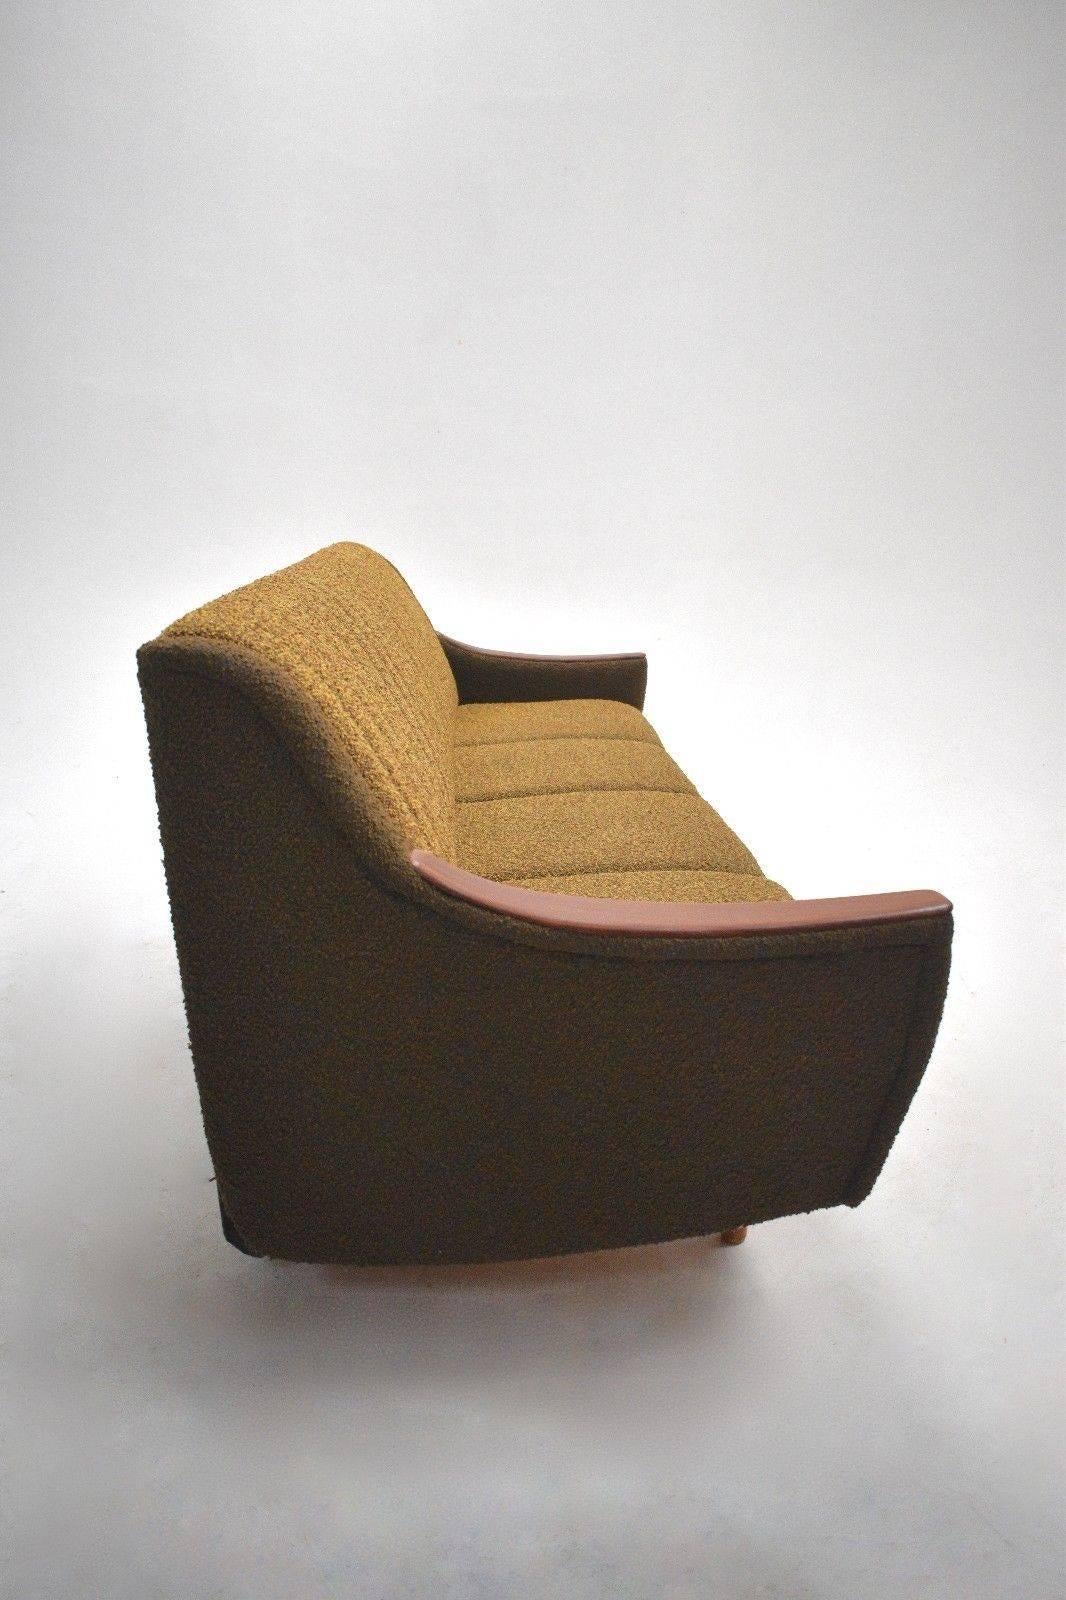 Mid-Century Modern Norwegian Yellow and Brown Wool Four-Seat Teak Sofabed, Midcentury, 1960s